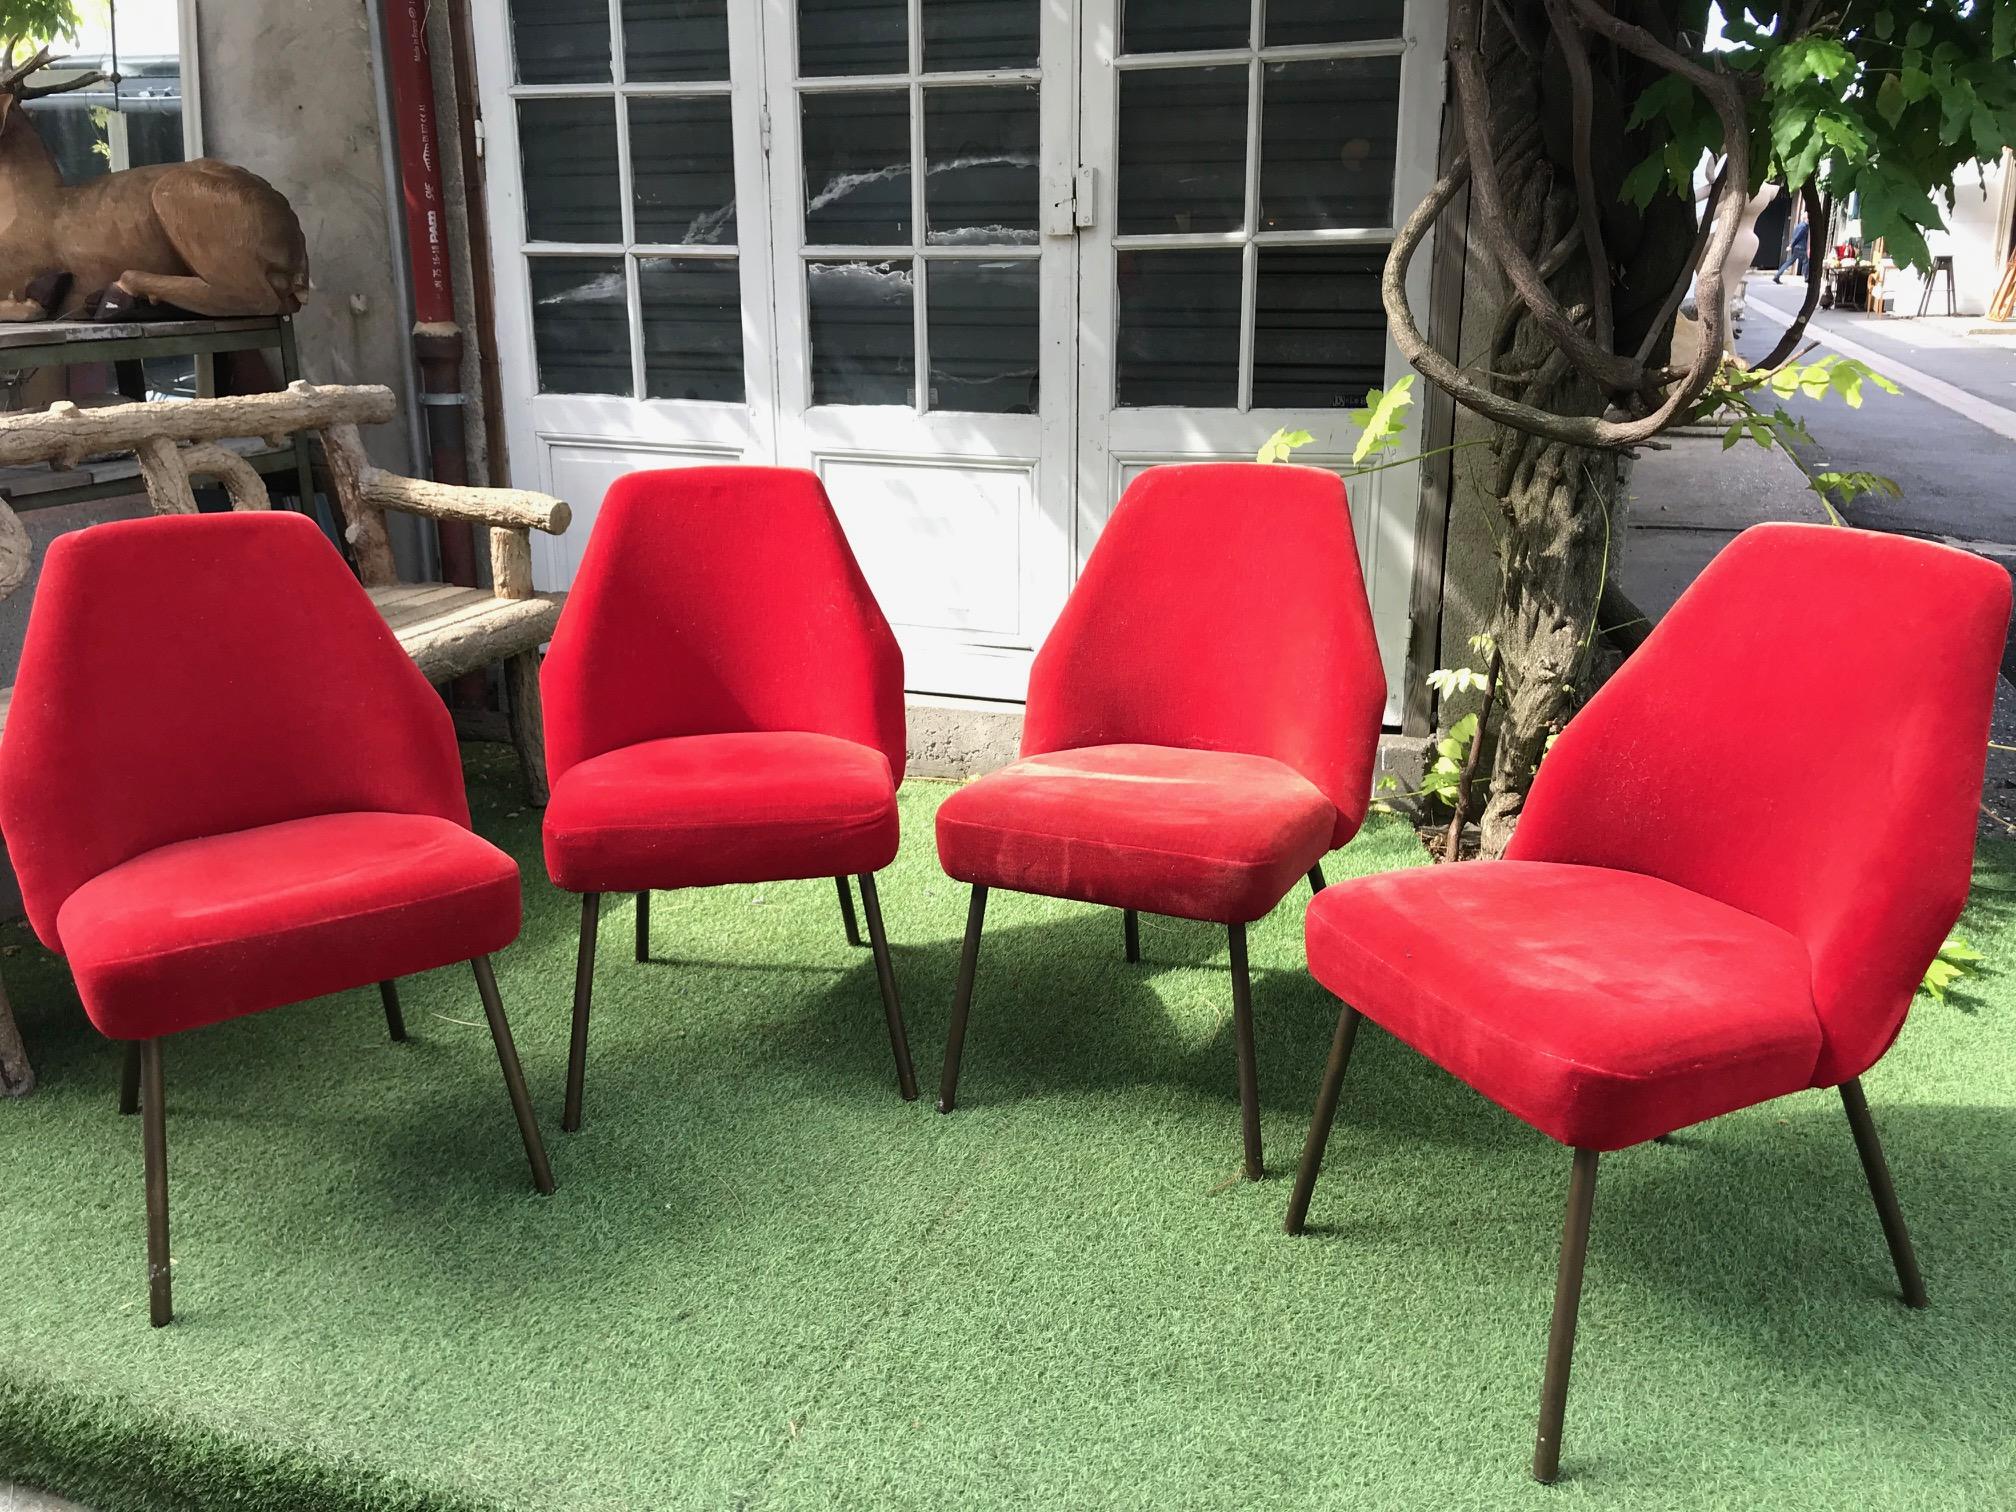 Set of 4 Campanula chairs by Carlo Pagani for Arflex. Red velvet to be reupholstered.